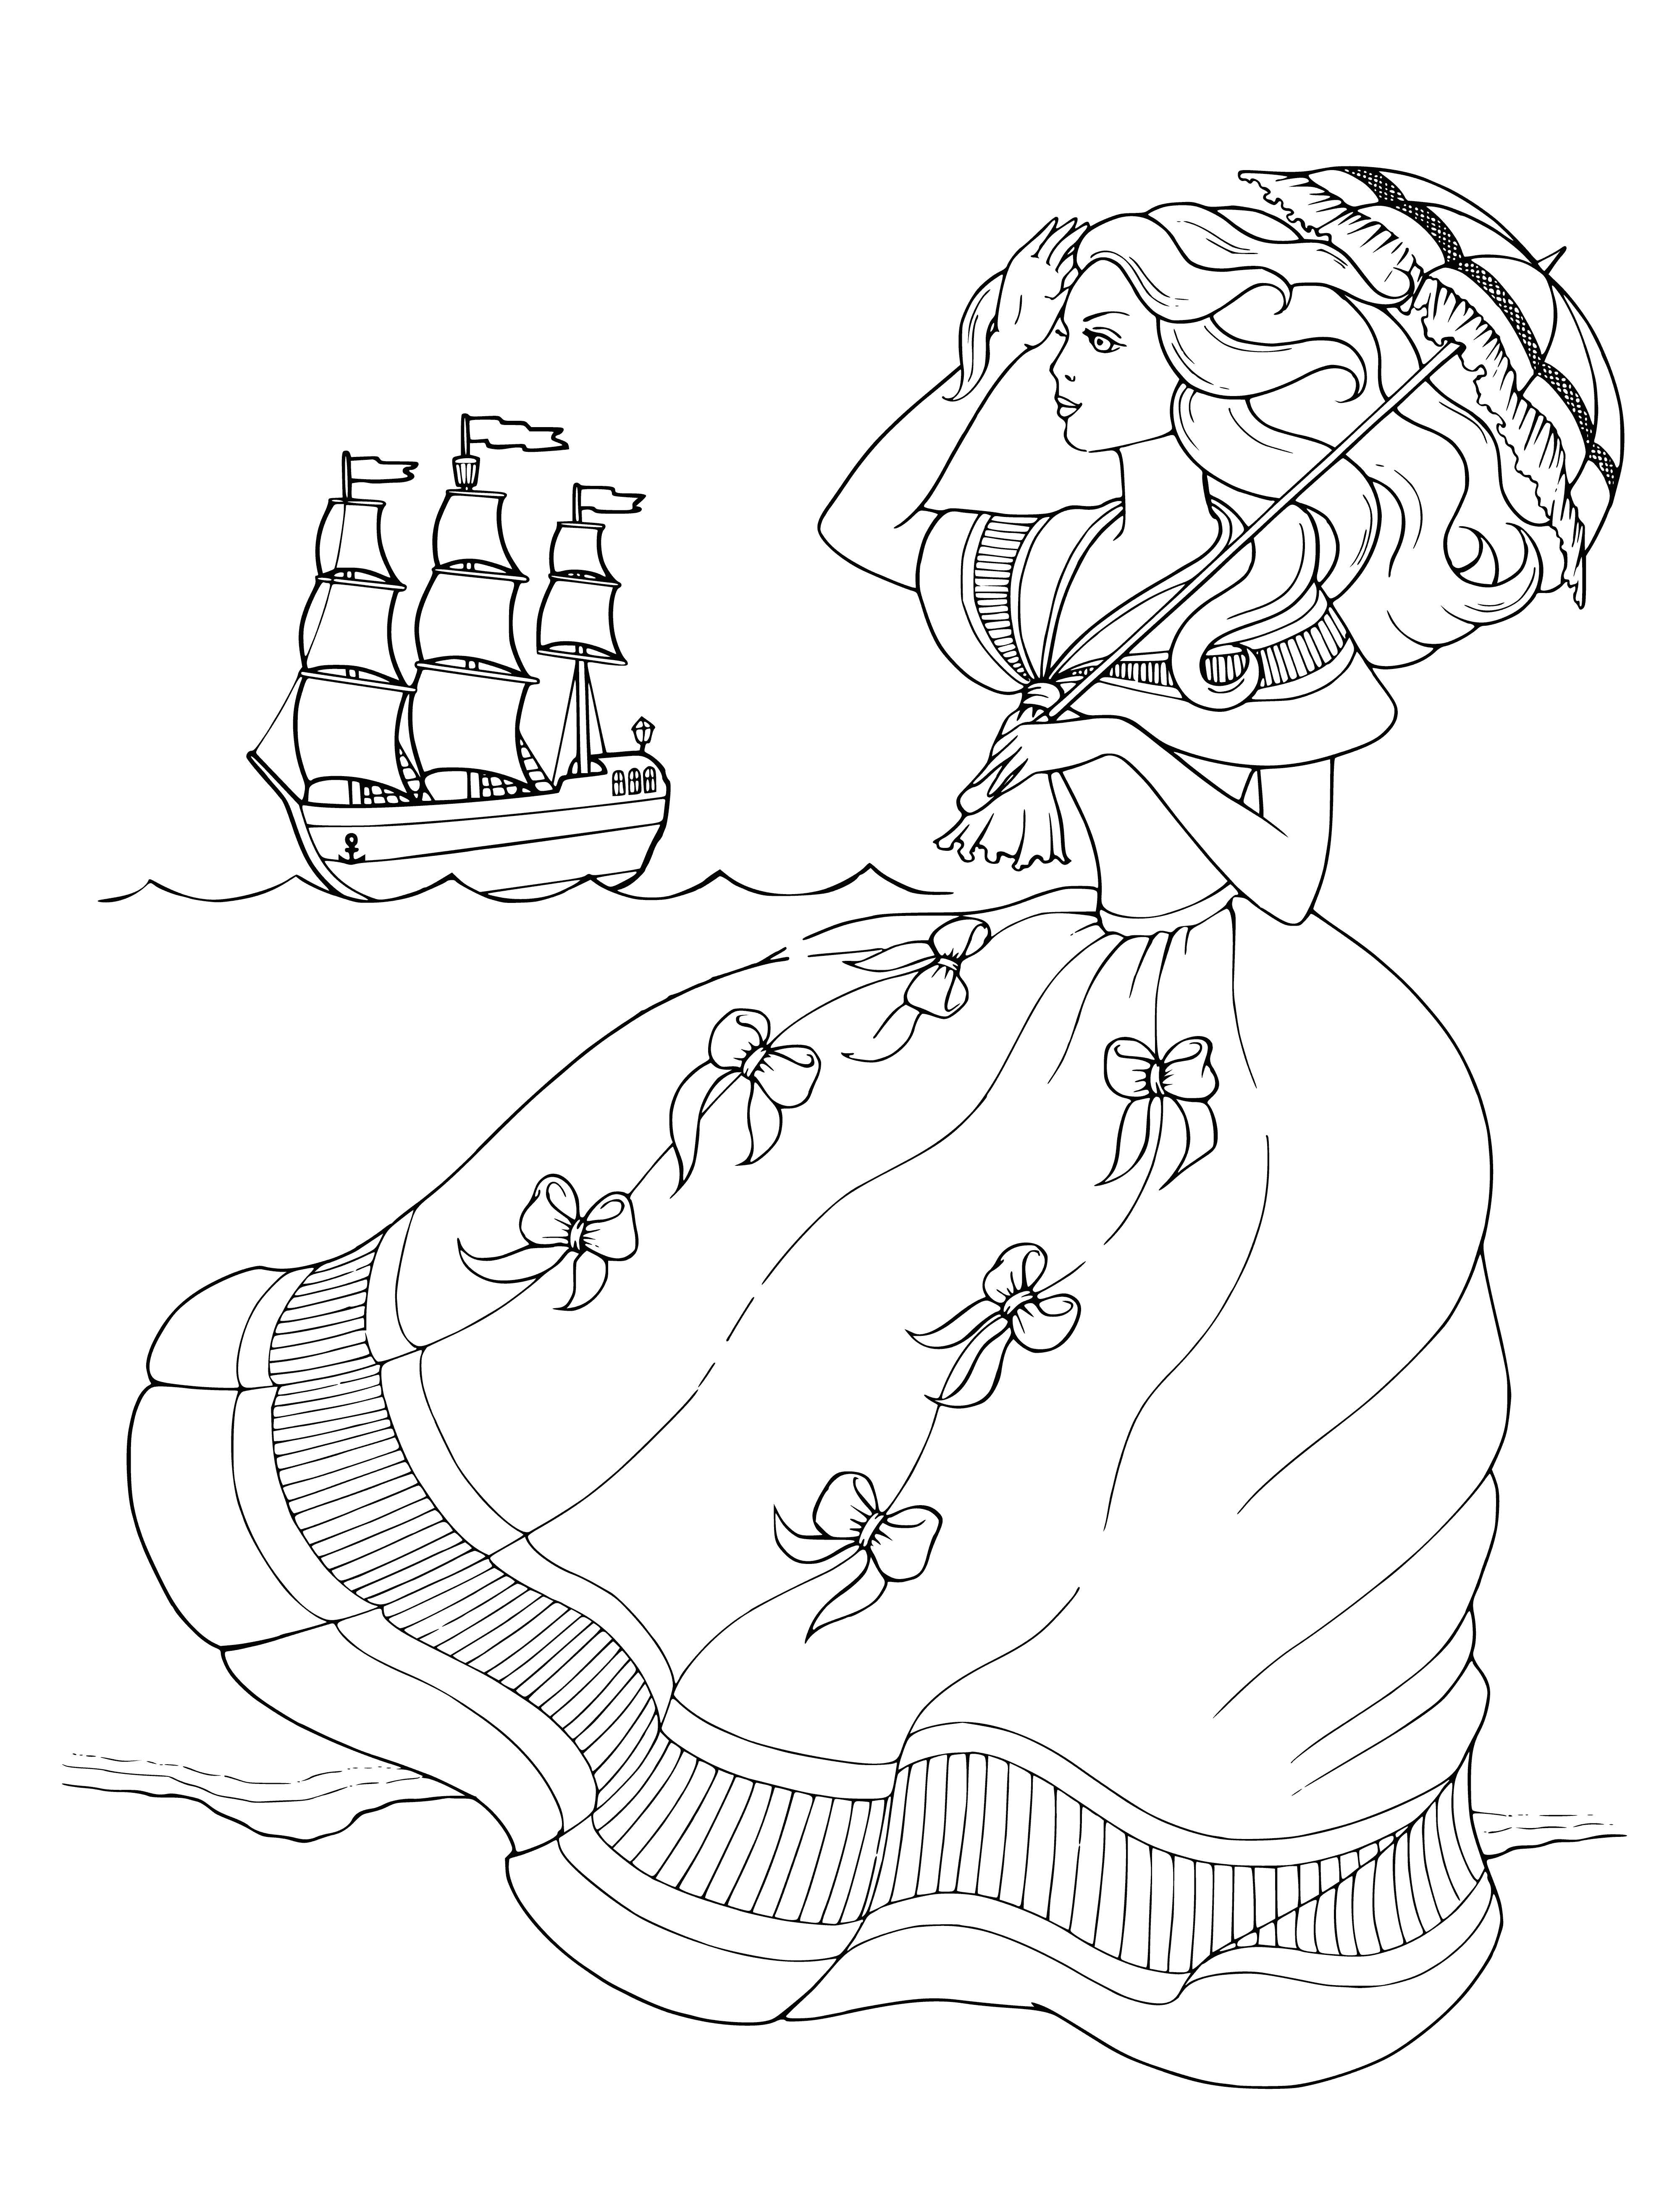 coloring page: Girl standing on beach wearing white dress, crown of flowers, listening to conch shell.